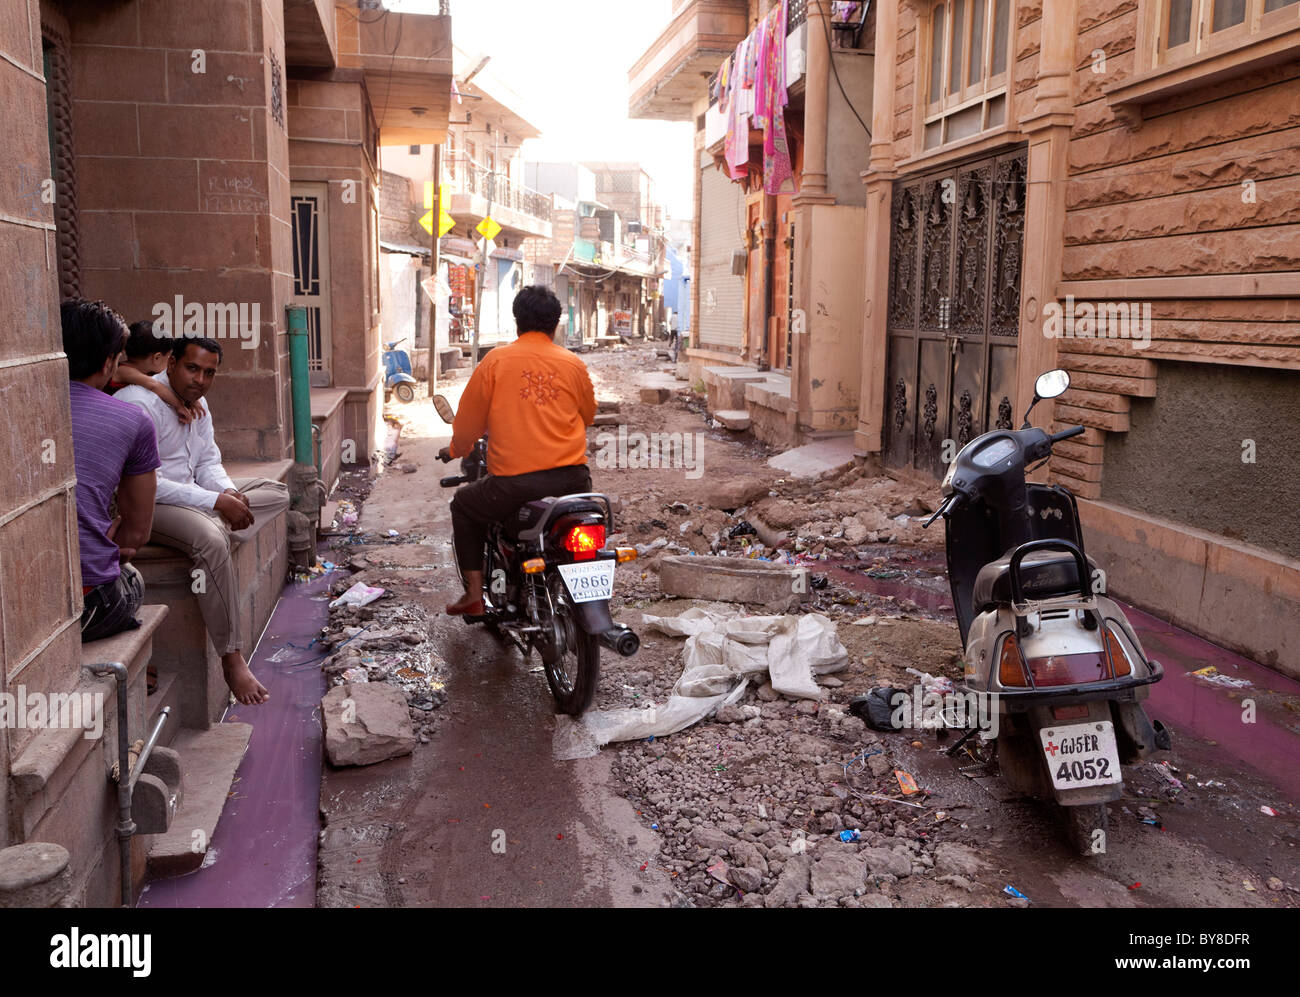 India, Rajasthan, Jodhpur, family sitting outside home in dilapidated street as motorcyclist rides past Stock Photo